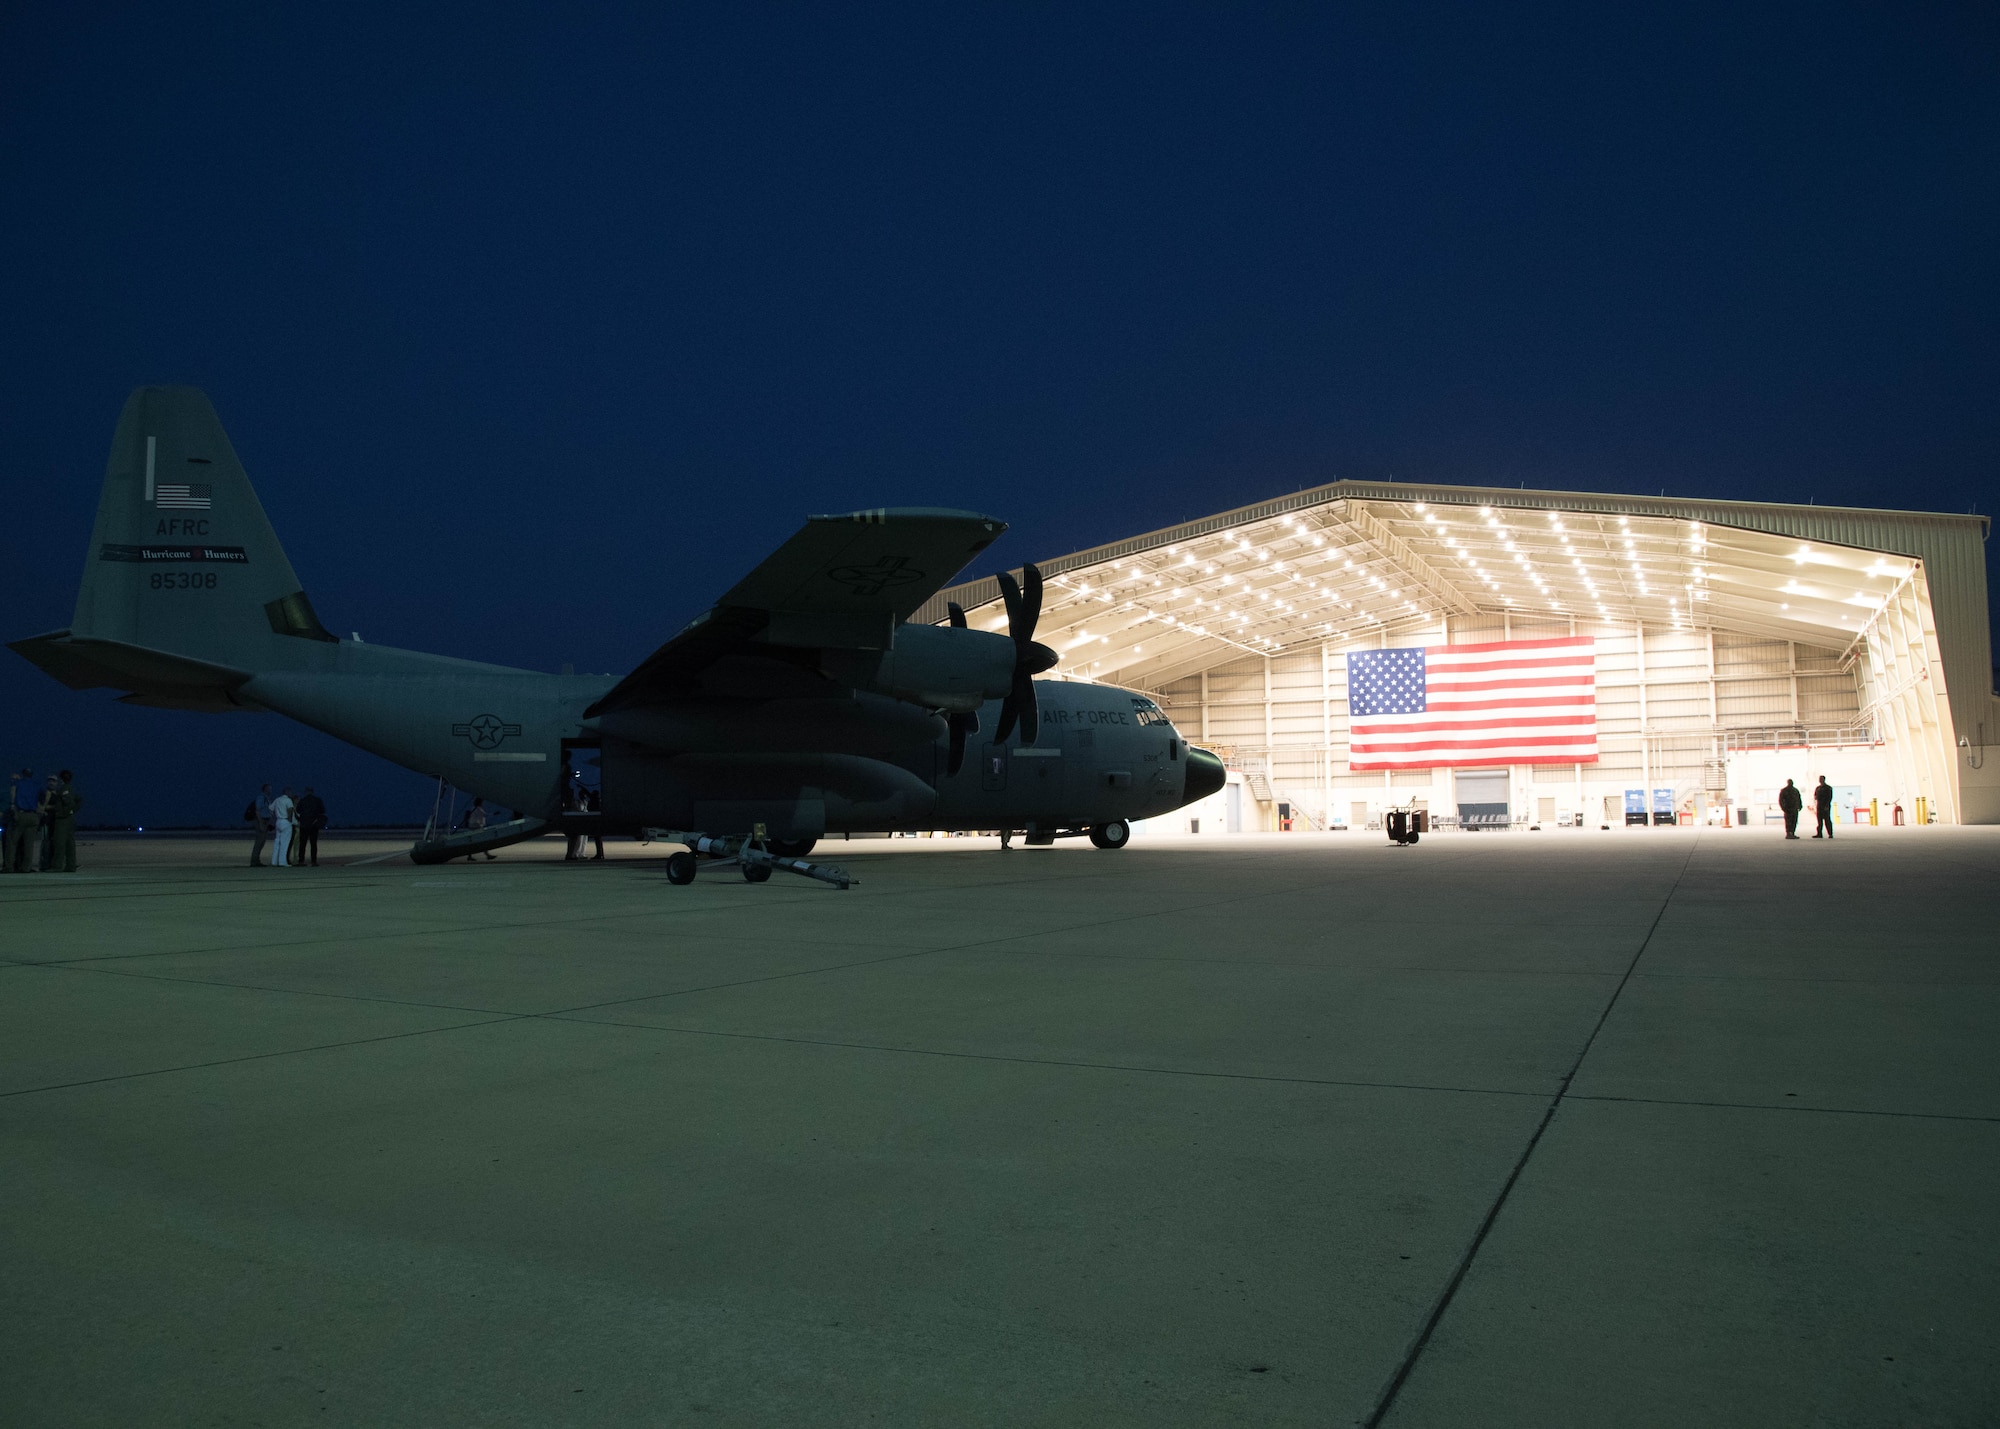 An Air Force Reserve Command WC-130J Hercules sits on the flight line at the Curacao International Airport, Curacao, April 12, 2019. National Hurricane Center director Ken Graham, federal hurricane specialists, and Reserve Citizen Airmen of the 53rd Weather Reconnaissance Squadron, discussed hurricane preparedness, resilience and how community members can become “weather-ready” as part of the Caribbean Hurricane Awareness Tour April 8-13, 2019. Tours of the WC-130J “Hurricane Hunter” offered dignataries, students and members of the public an opportunity to learn how scientists collect hurricane information. The NOAA WP-3D aircraft, used for both hurricane forecasting and research, was on display as well. (U.S. Air Force photo/Lt. Col. Marnee A.C. Losurdo)